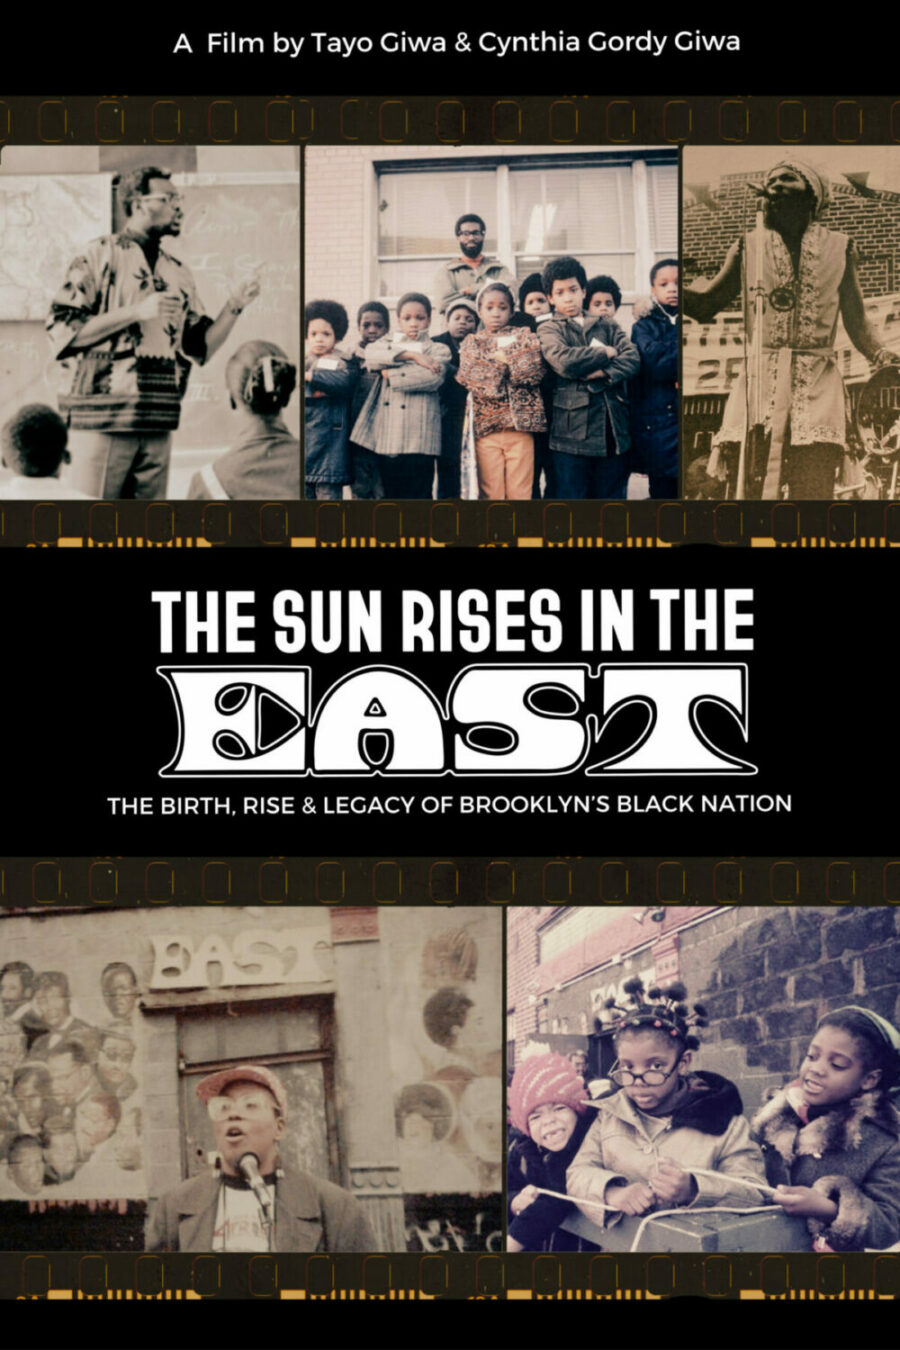 The Sun Rises in the East Film Screening and Panel Discussion